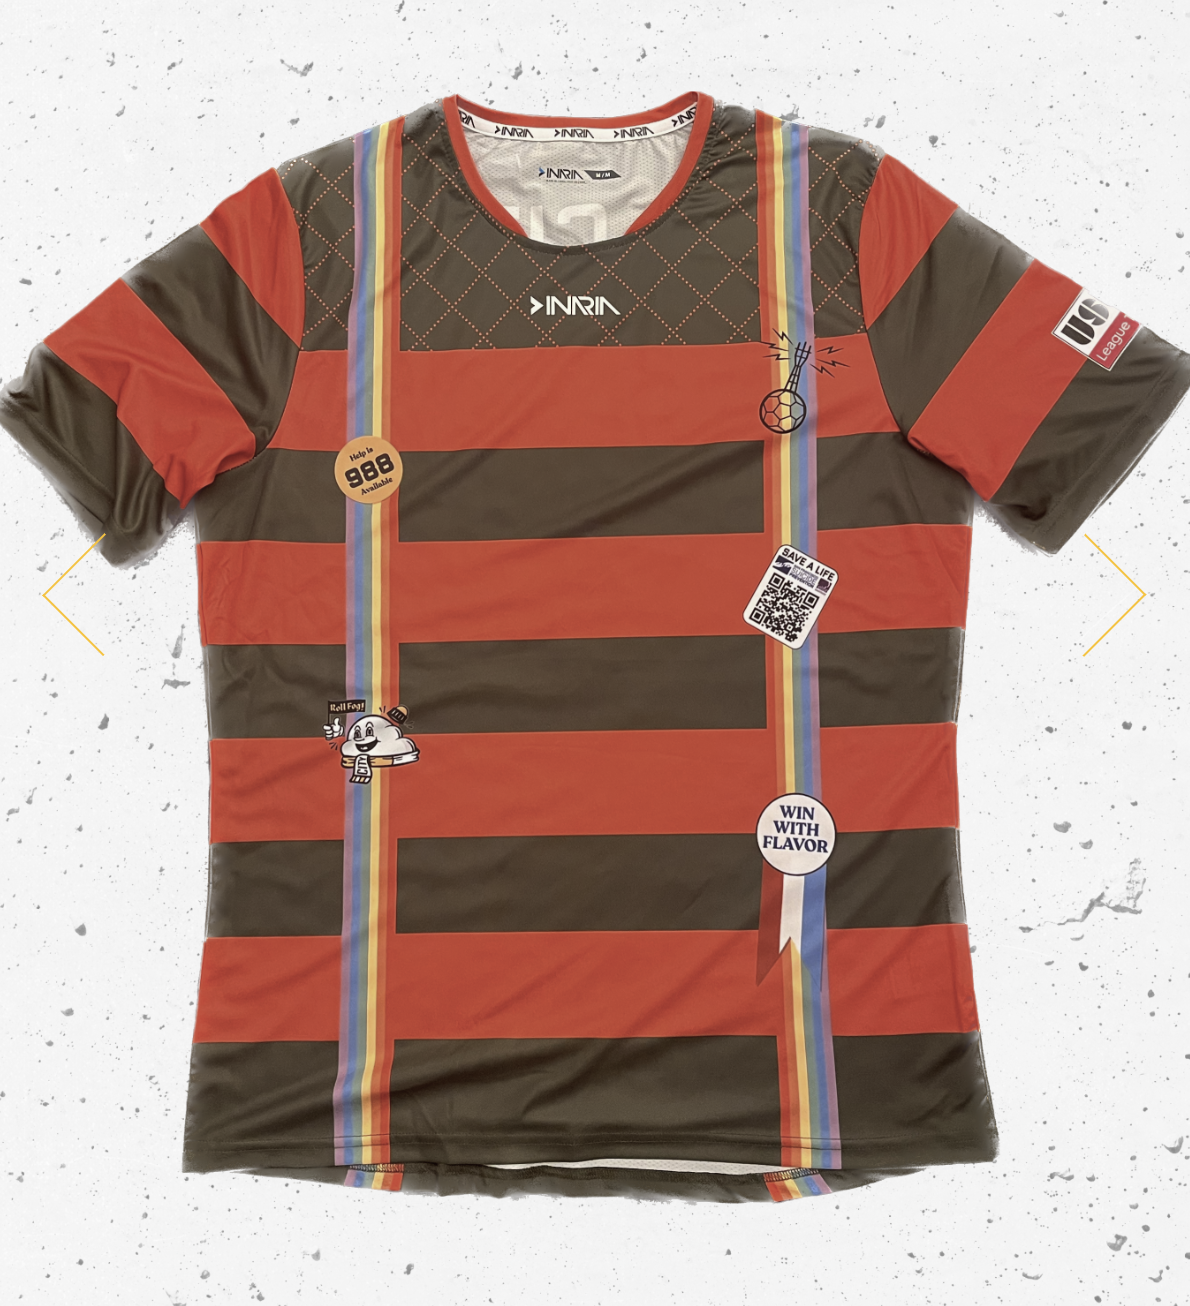 A red and black striped t-shirt with rainbow suspenders worked into the design.